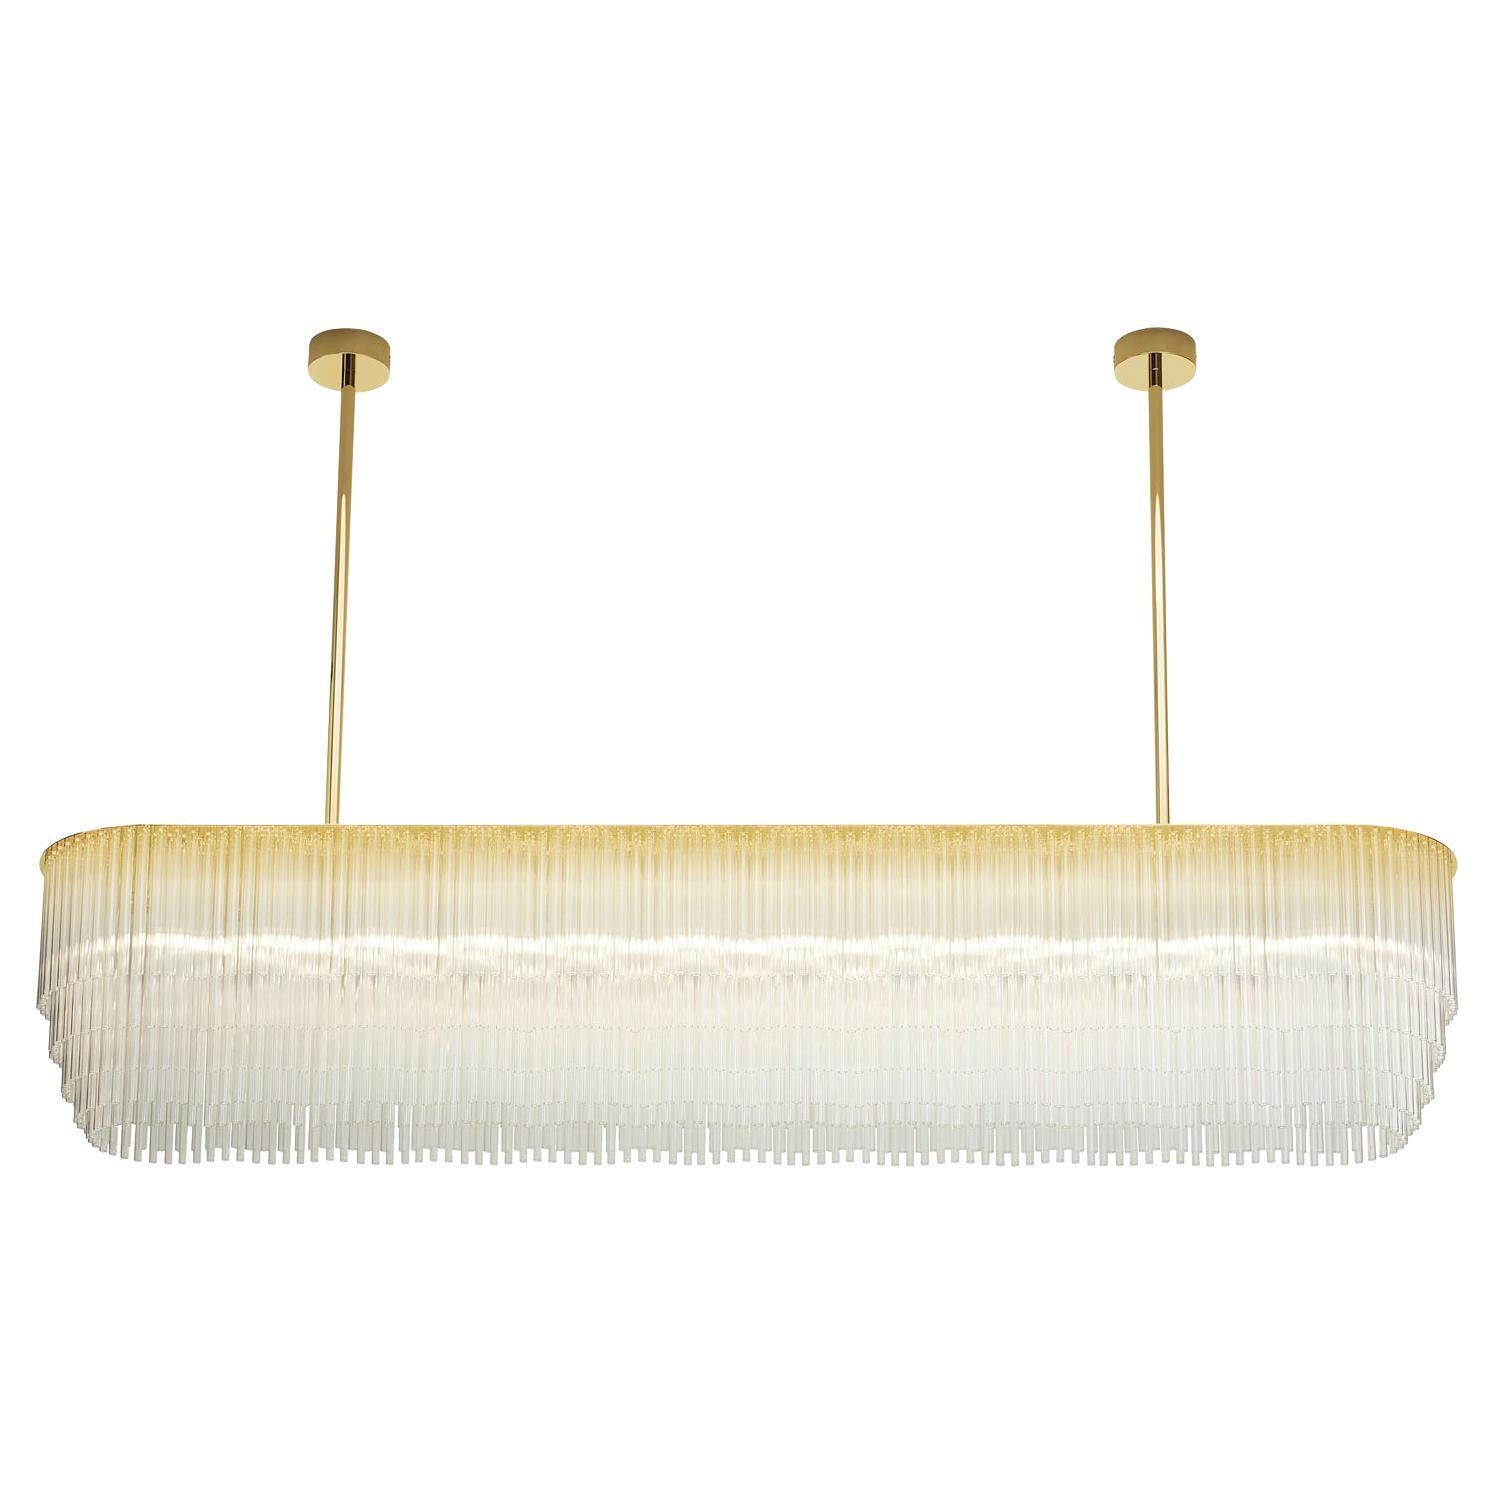 Linear Chandelier 1697mm / 66.75" in Polished Brass with Tiered Glass Profile For Sale